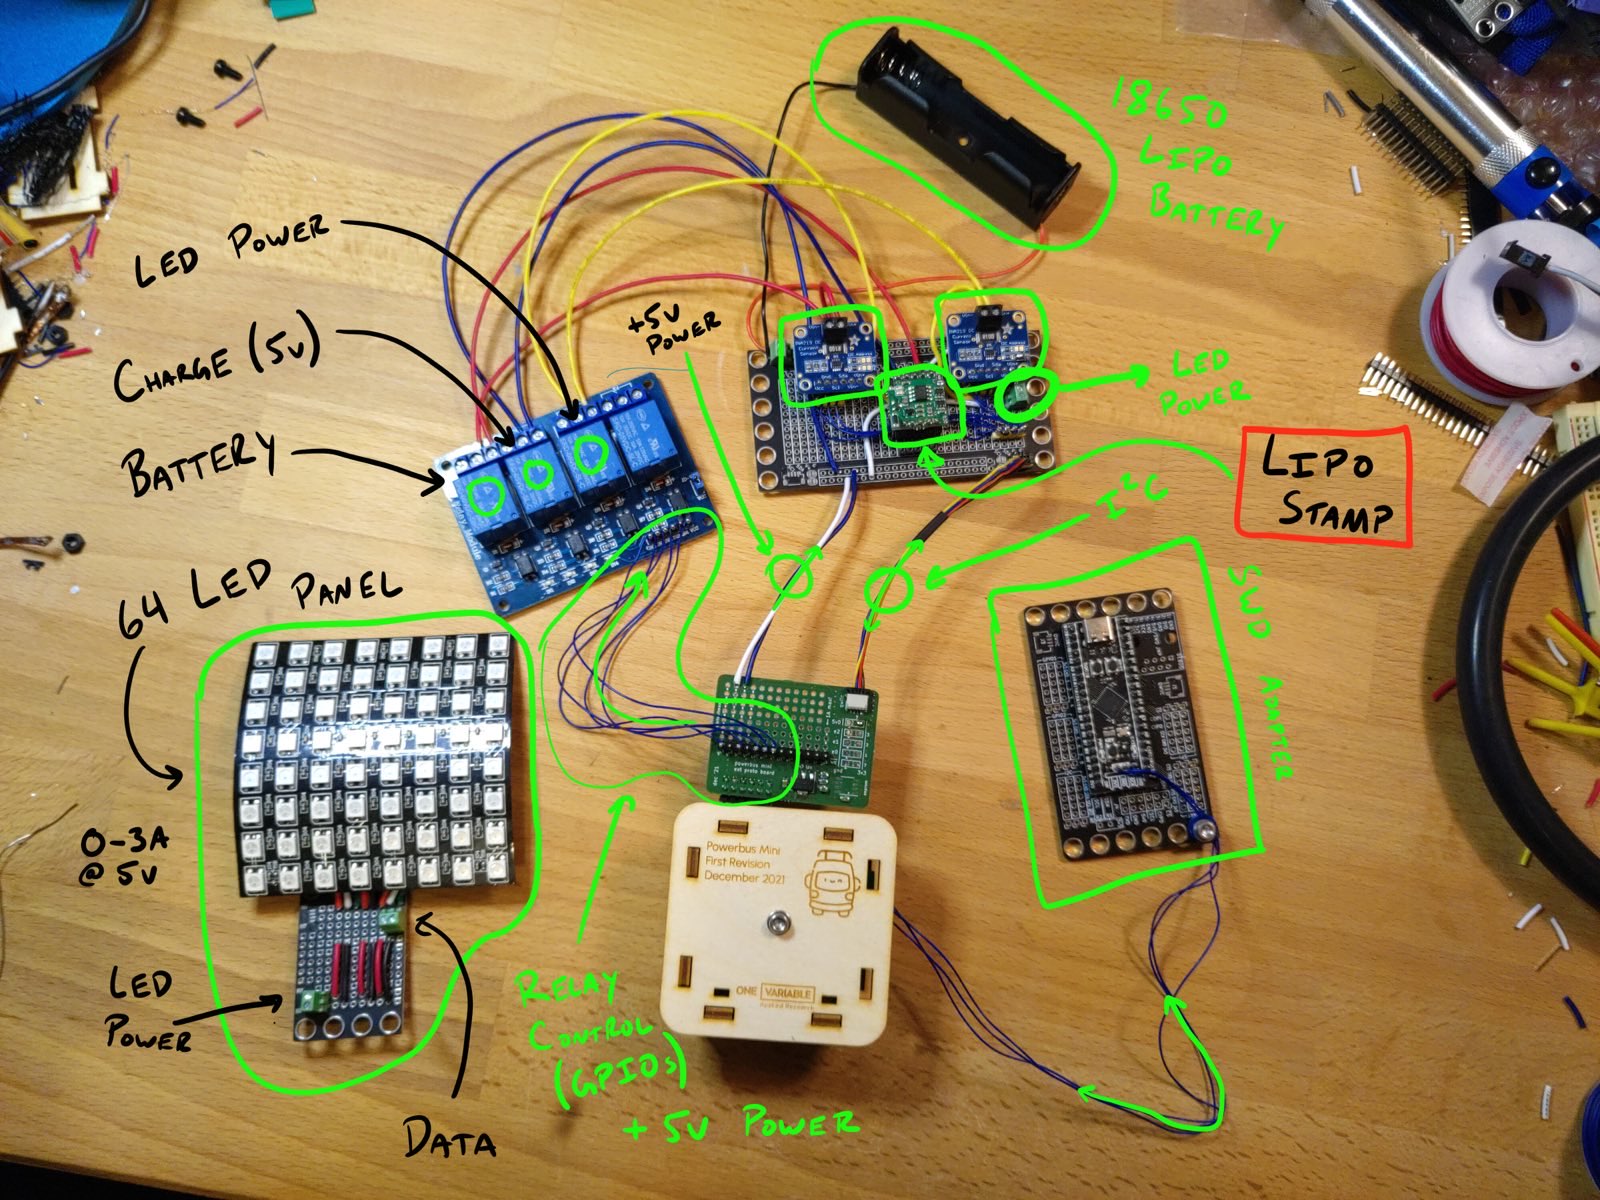 An annotated photograph of a hardware test setup